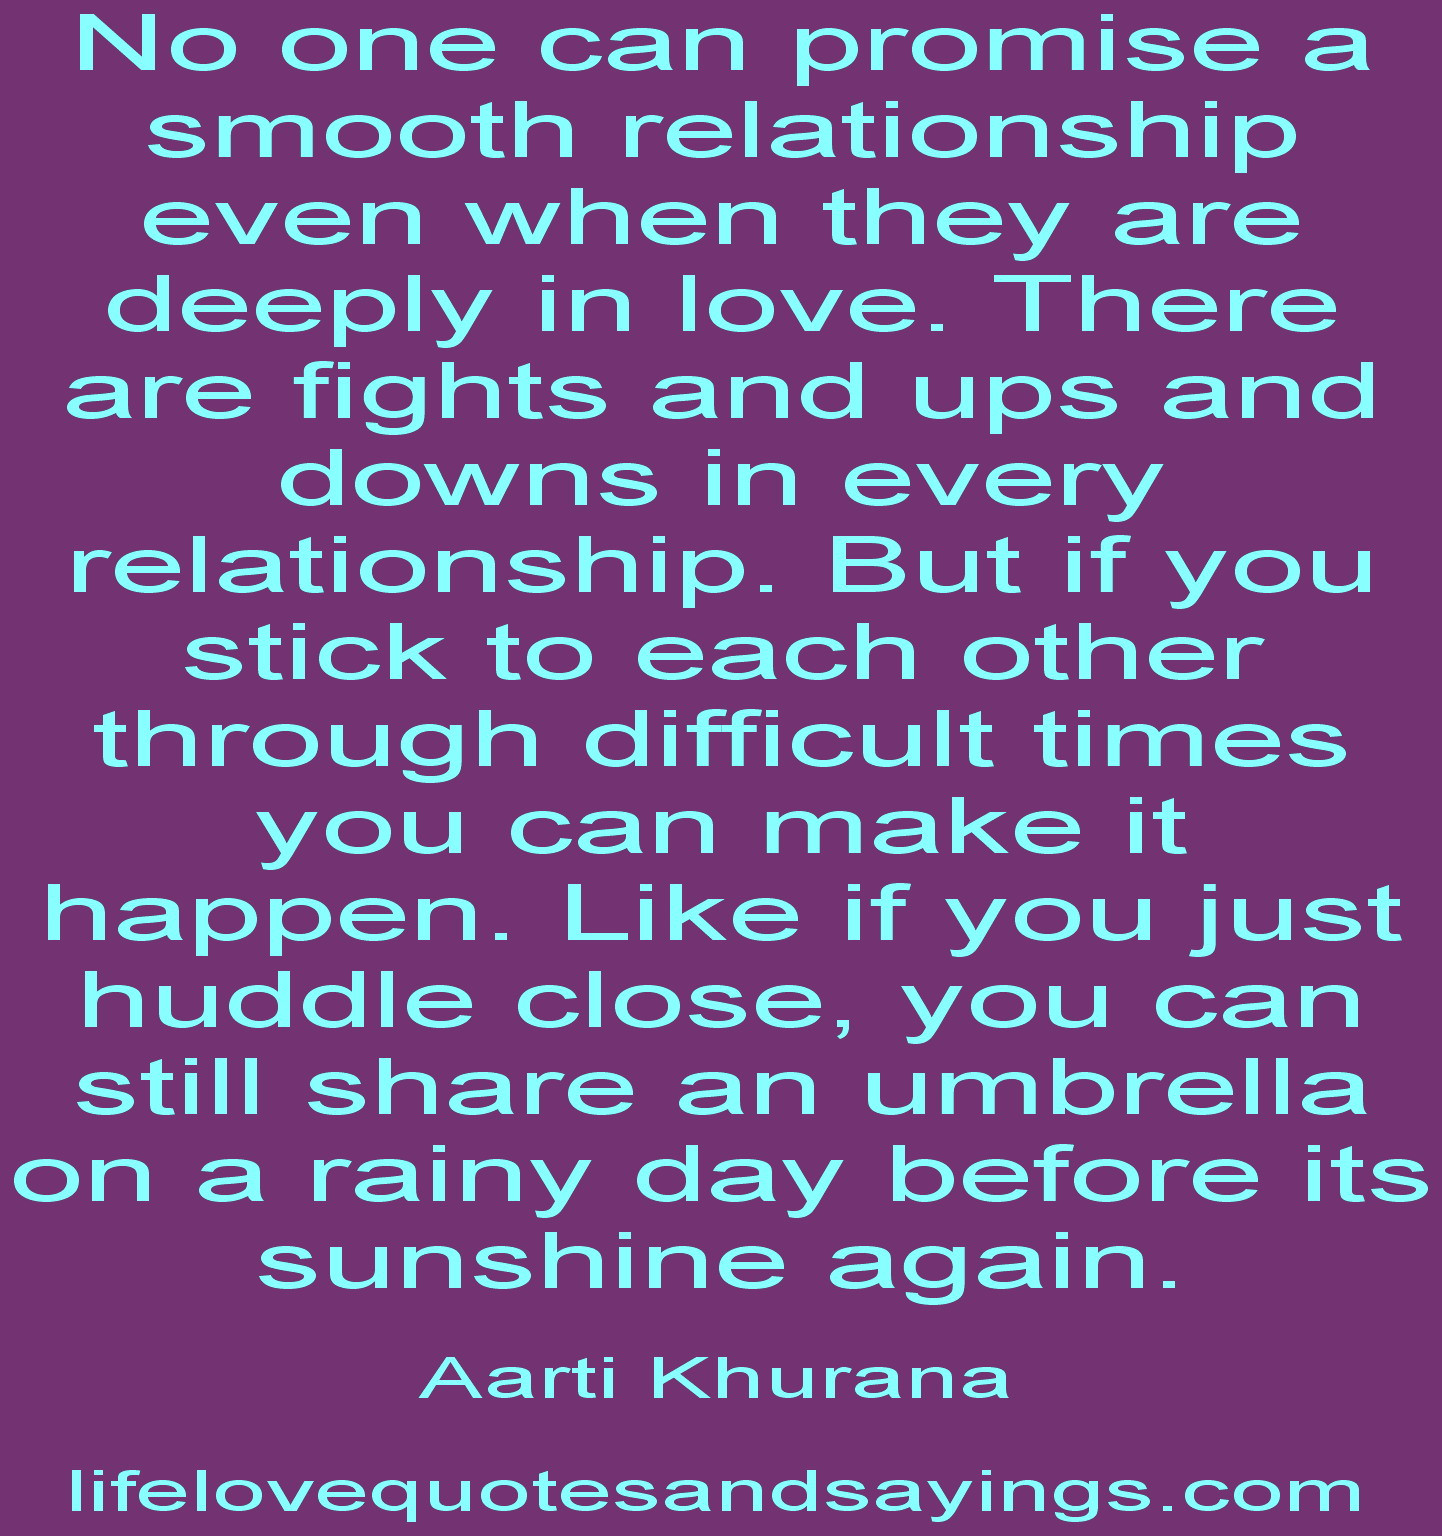 Quotes About Difficult Love Relationships
 Quotes About Difficult Relationships QuotesGram